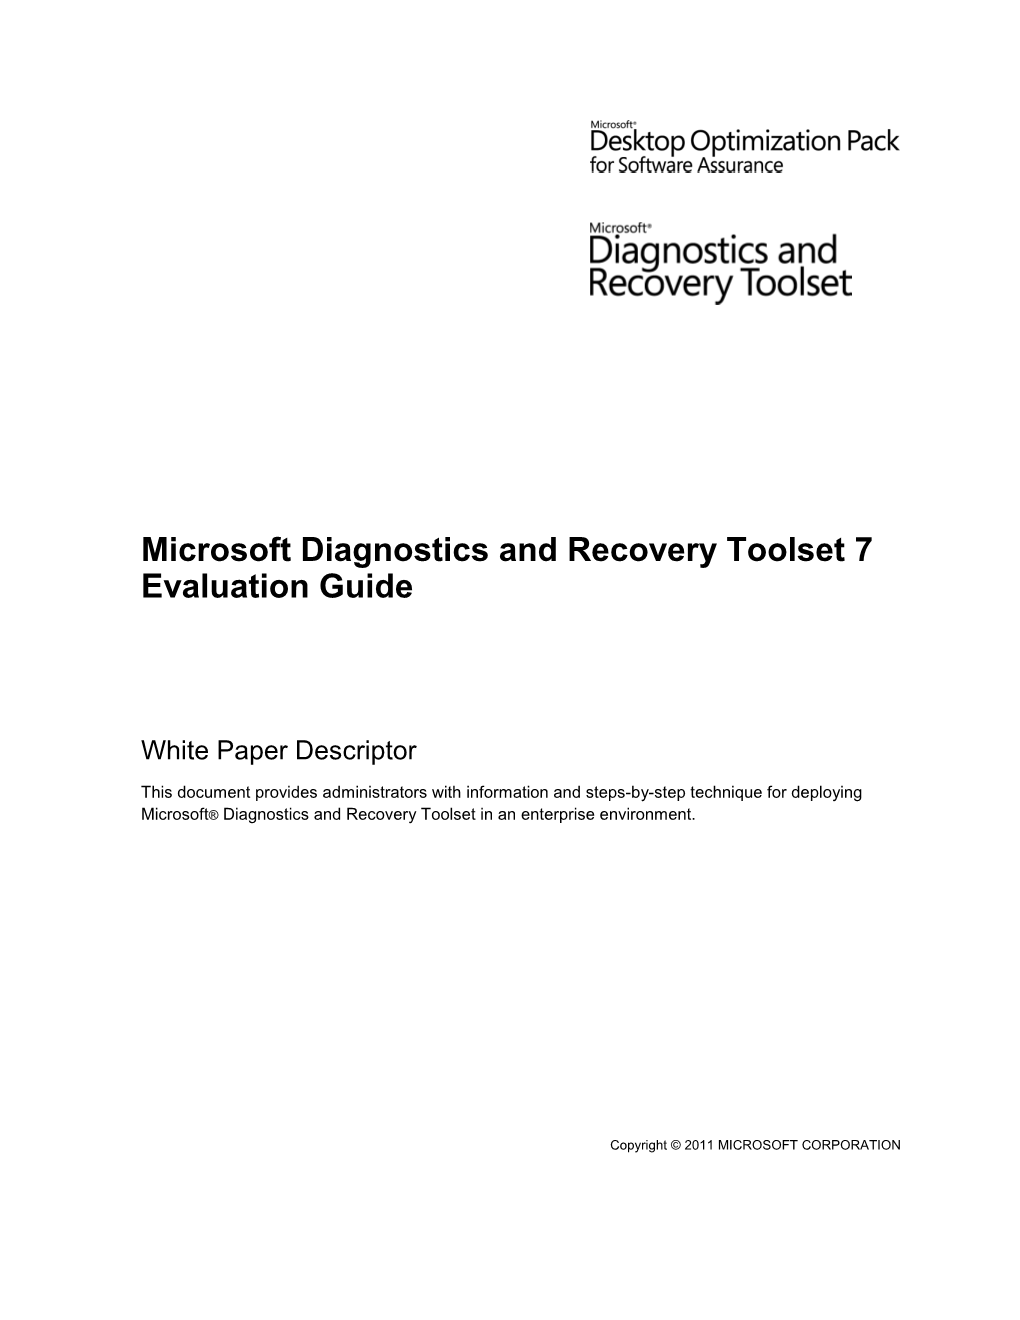 Microsoft Diagnostics and Recovery Toolset 7 Evaluation Guide